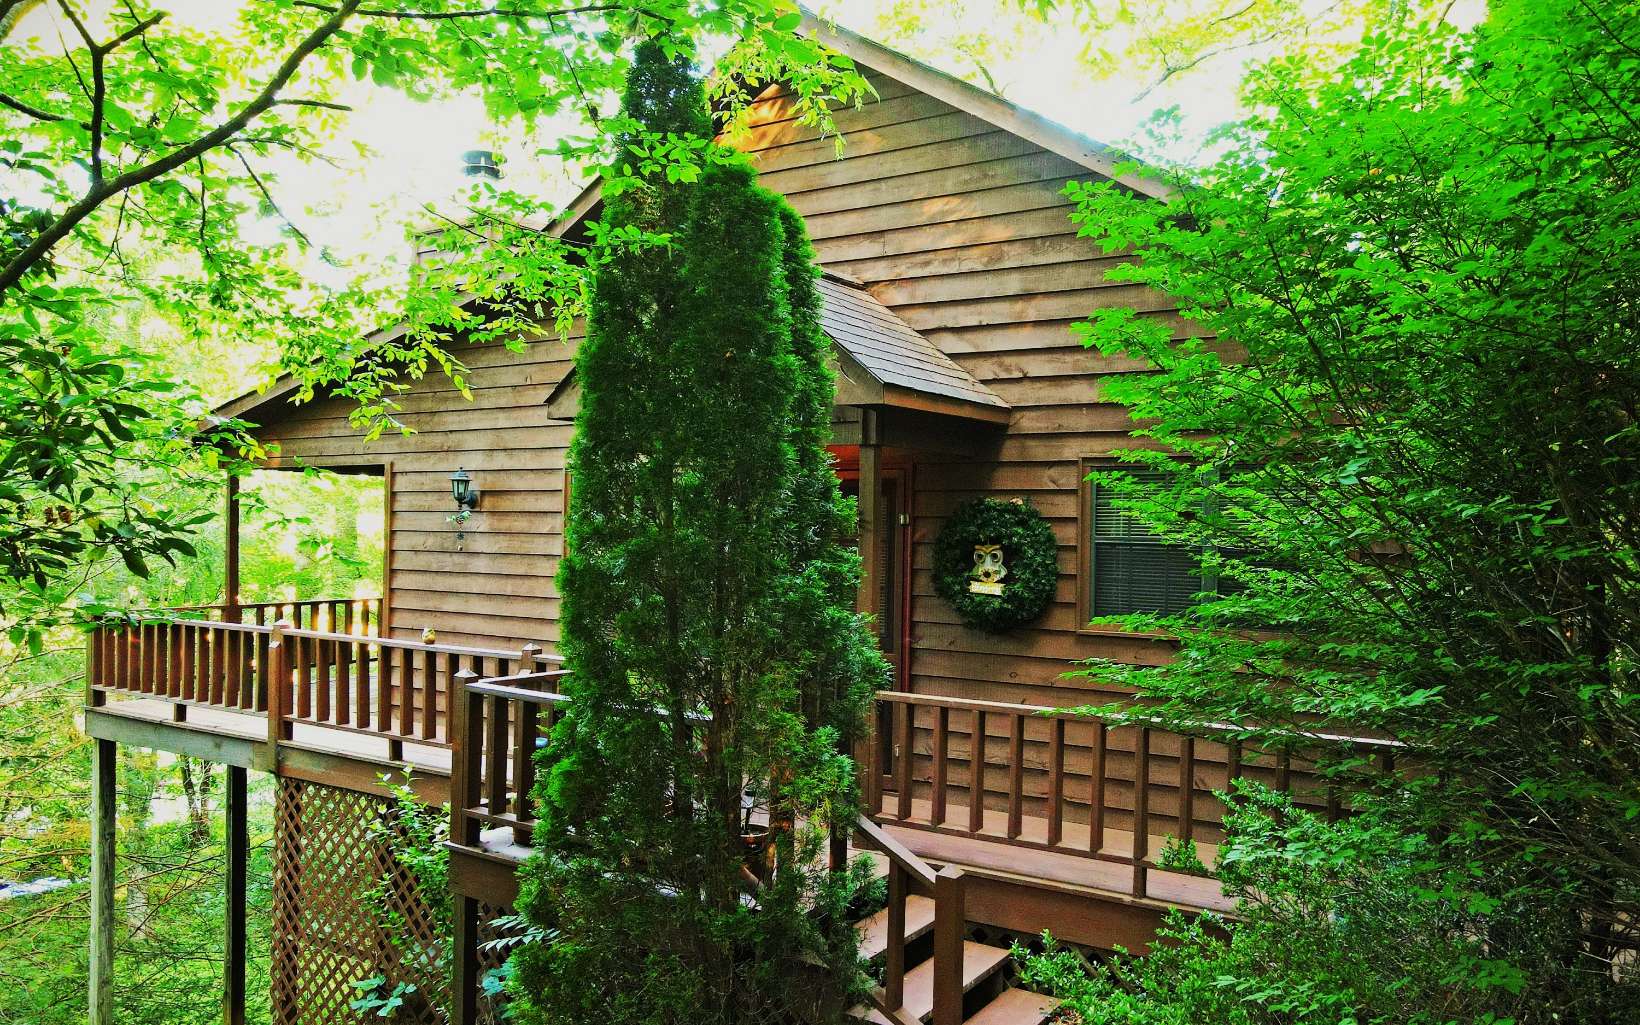 LOCATION LOCATION!! *RESORT AREA* Quality professionally built CEDAR cabin w/ approx 100 ft of noisy, wide CREEK FRONTAGE. Just 6 miles from LAKE CHATUGE w/ BEACH and less than 10 miles to LAKE NOTTELY. FULLY FURNISHED & ready for peaceful FULL TIME LIVING, a MOUNTAIN GET AWAY or an INCOME PRODUCING INVESTMENT PROPERTY. Beautiful WIDE PLANK flooring, VAULTED CEILINGS and REAL ROCK FIREPLACE. Originally built & used as a rental property. One turn off of HWY 515 for easy access to Atlanta. Close to Blairsville & Hiawasse, less than 10 mi. to BRASSTOWN VALLY RESORT w GOLF, GA MTN FAIRGROUNDS & MUSIC HALL. Near HIKING, BOATING, TROUT FISHING AND ALL THE JOYS OF MOUNTAN LIVING. This lovely MOUNTAIN community just feels like home. FIBER OPTIC in place.